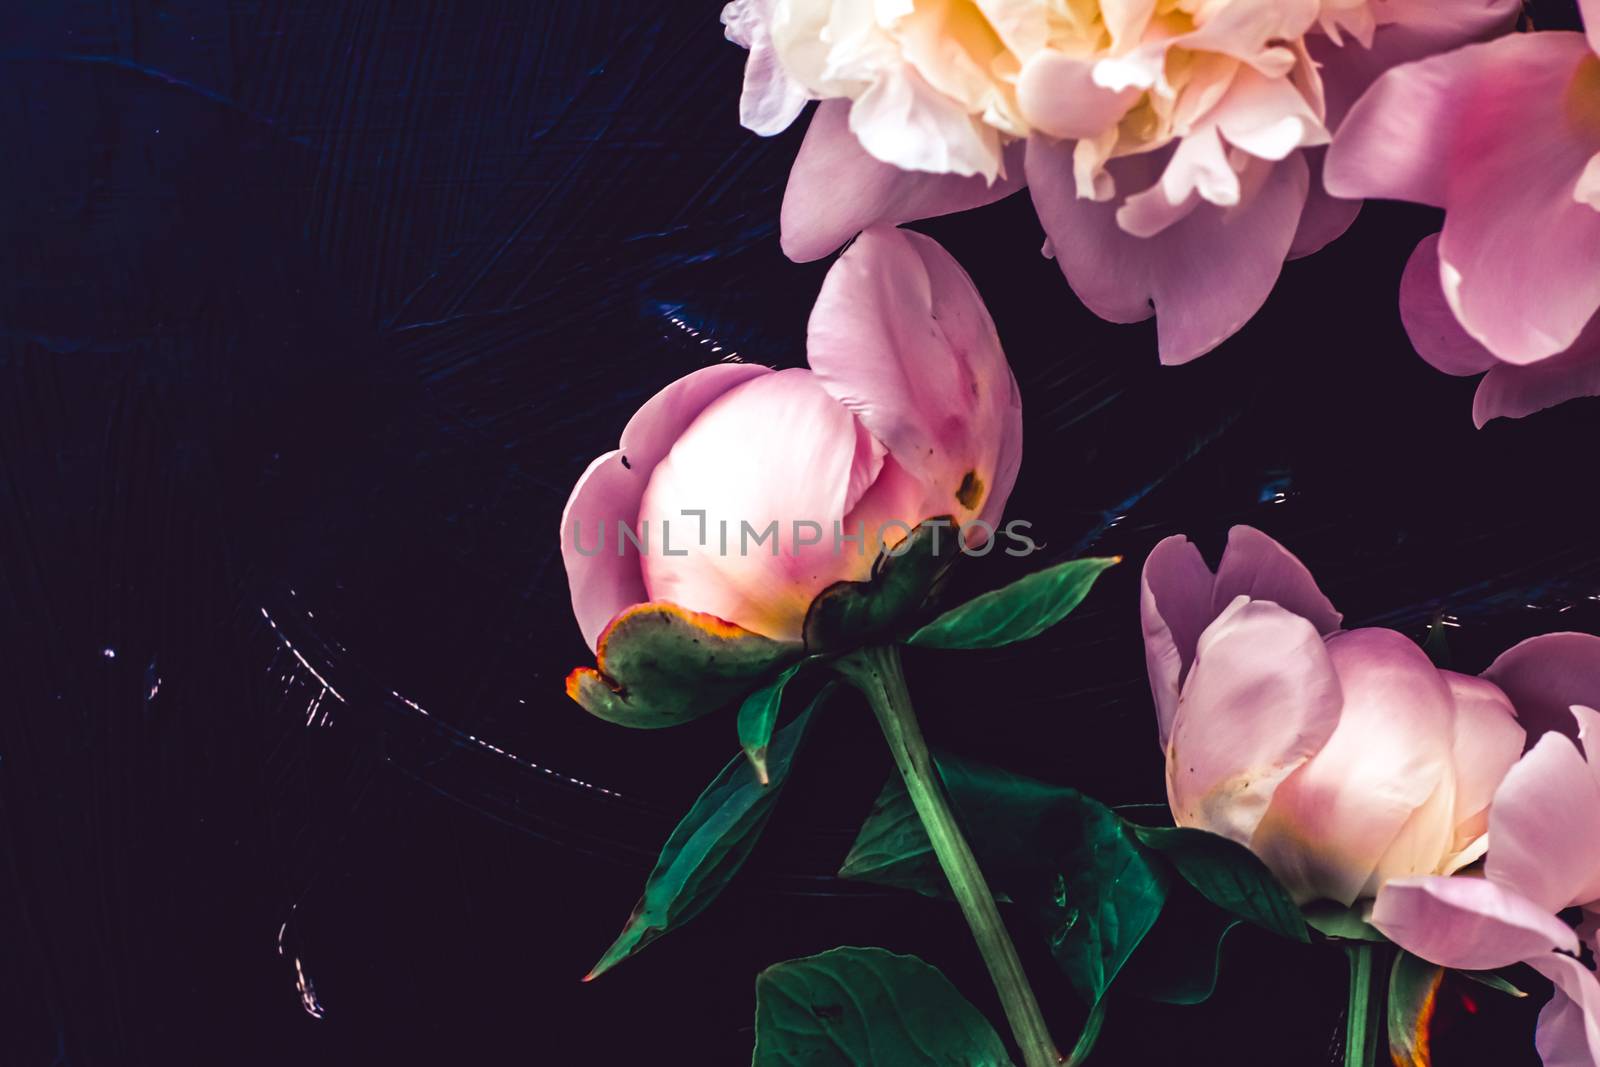 Pink peony flowers as floral art background, botanical flatlay and luxury branding by Anneleven